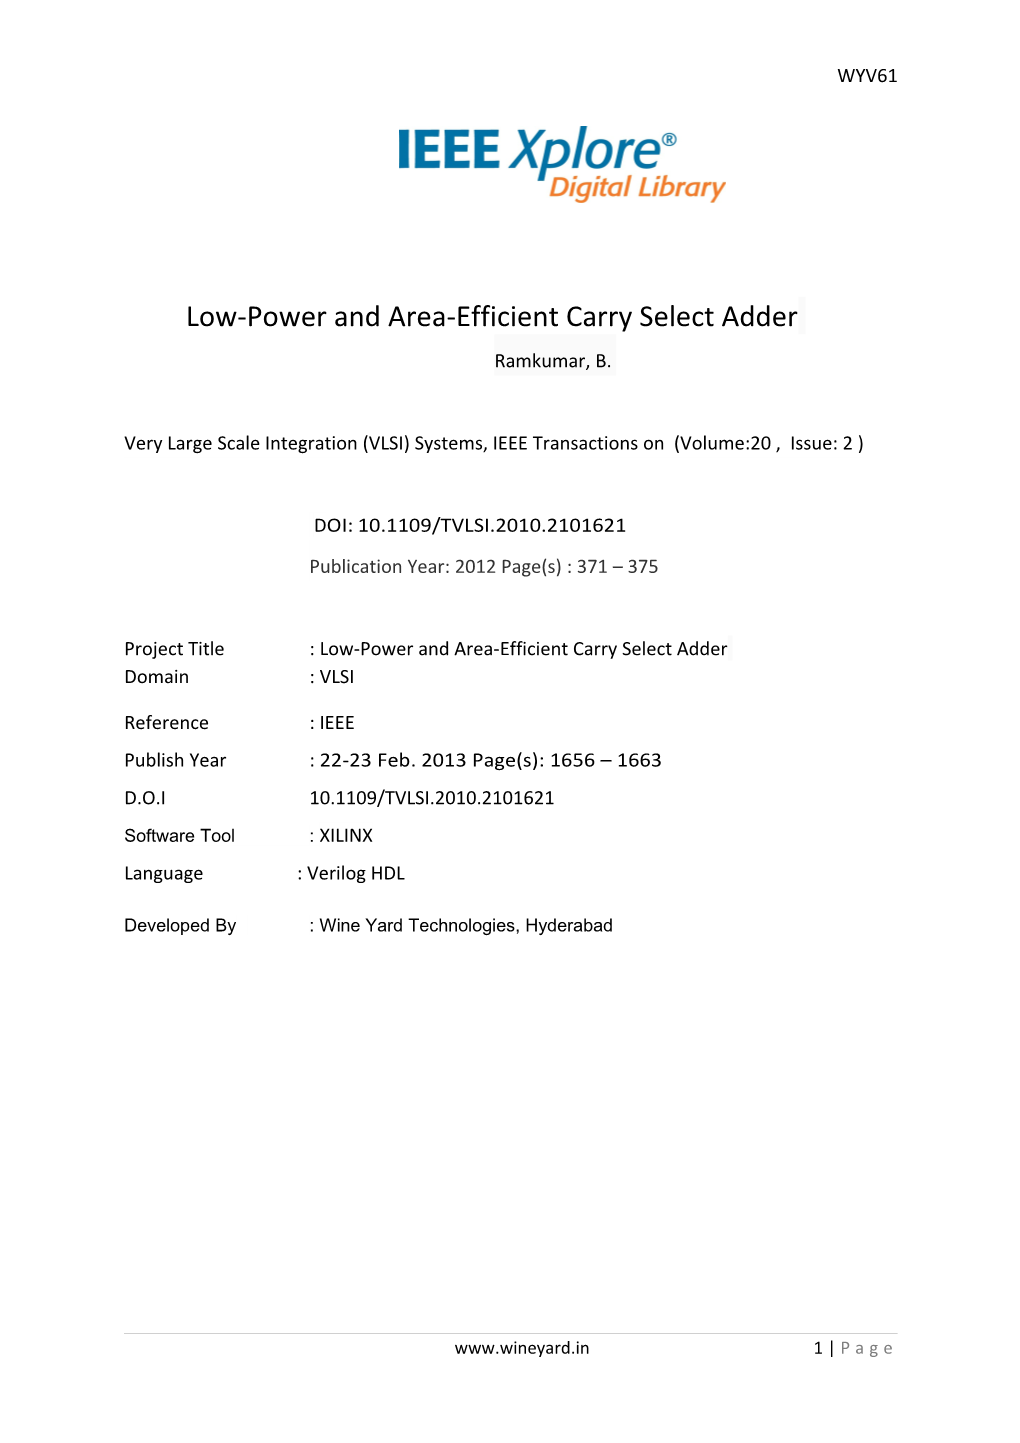 Low-Power and Area-Efficient Carry Select Adder